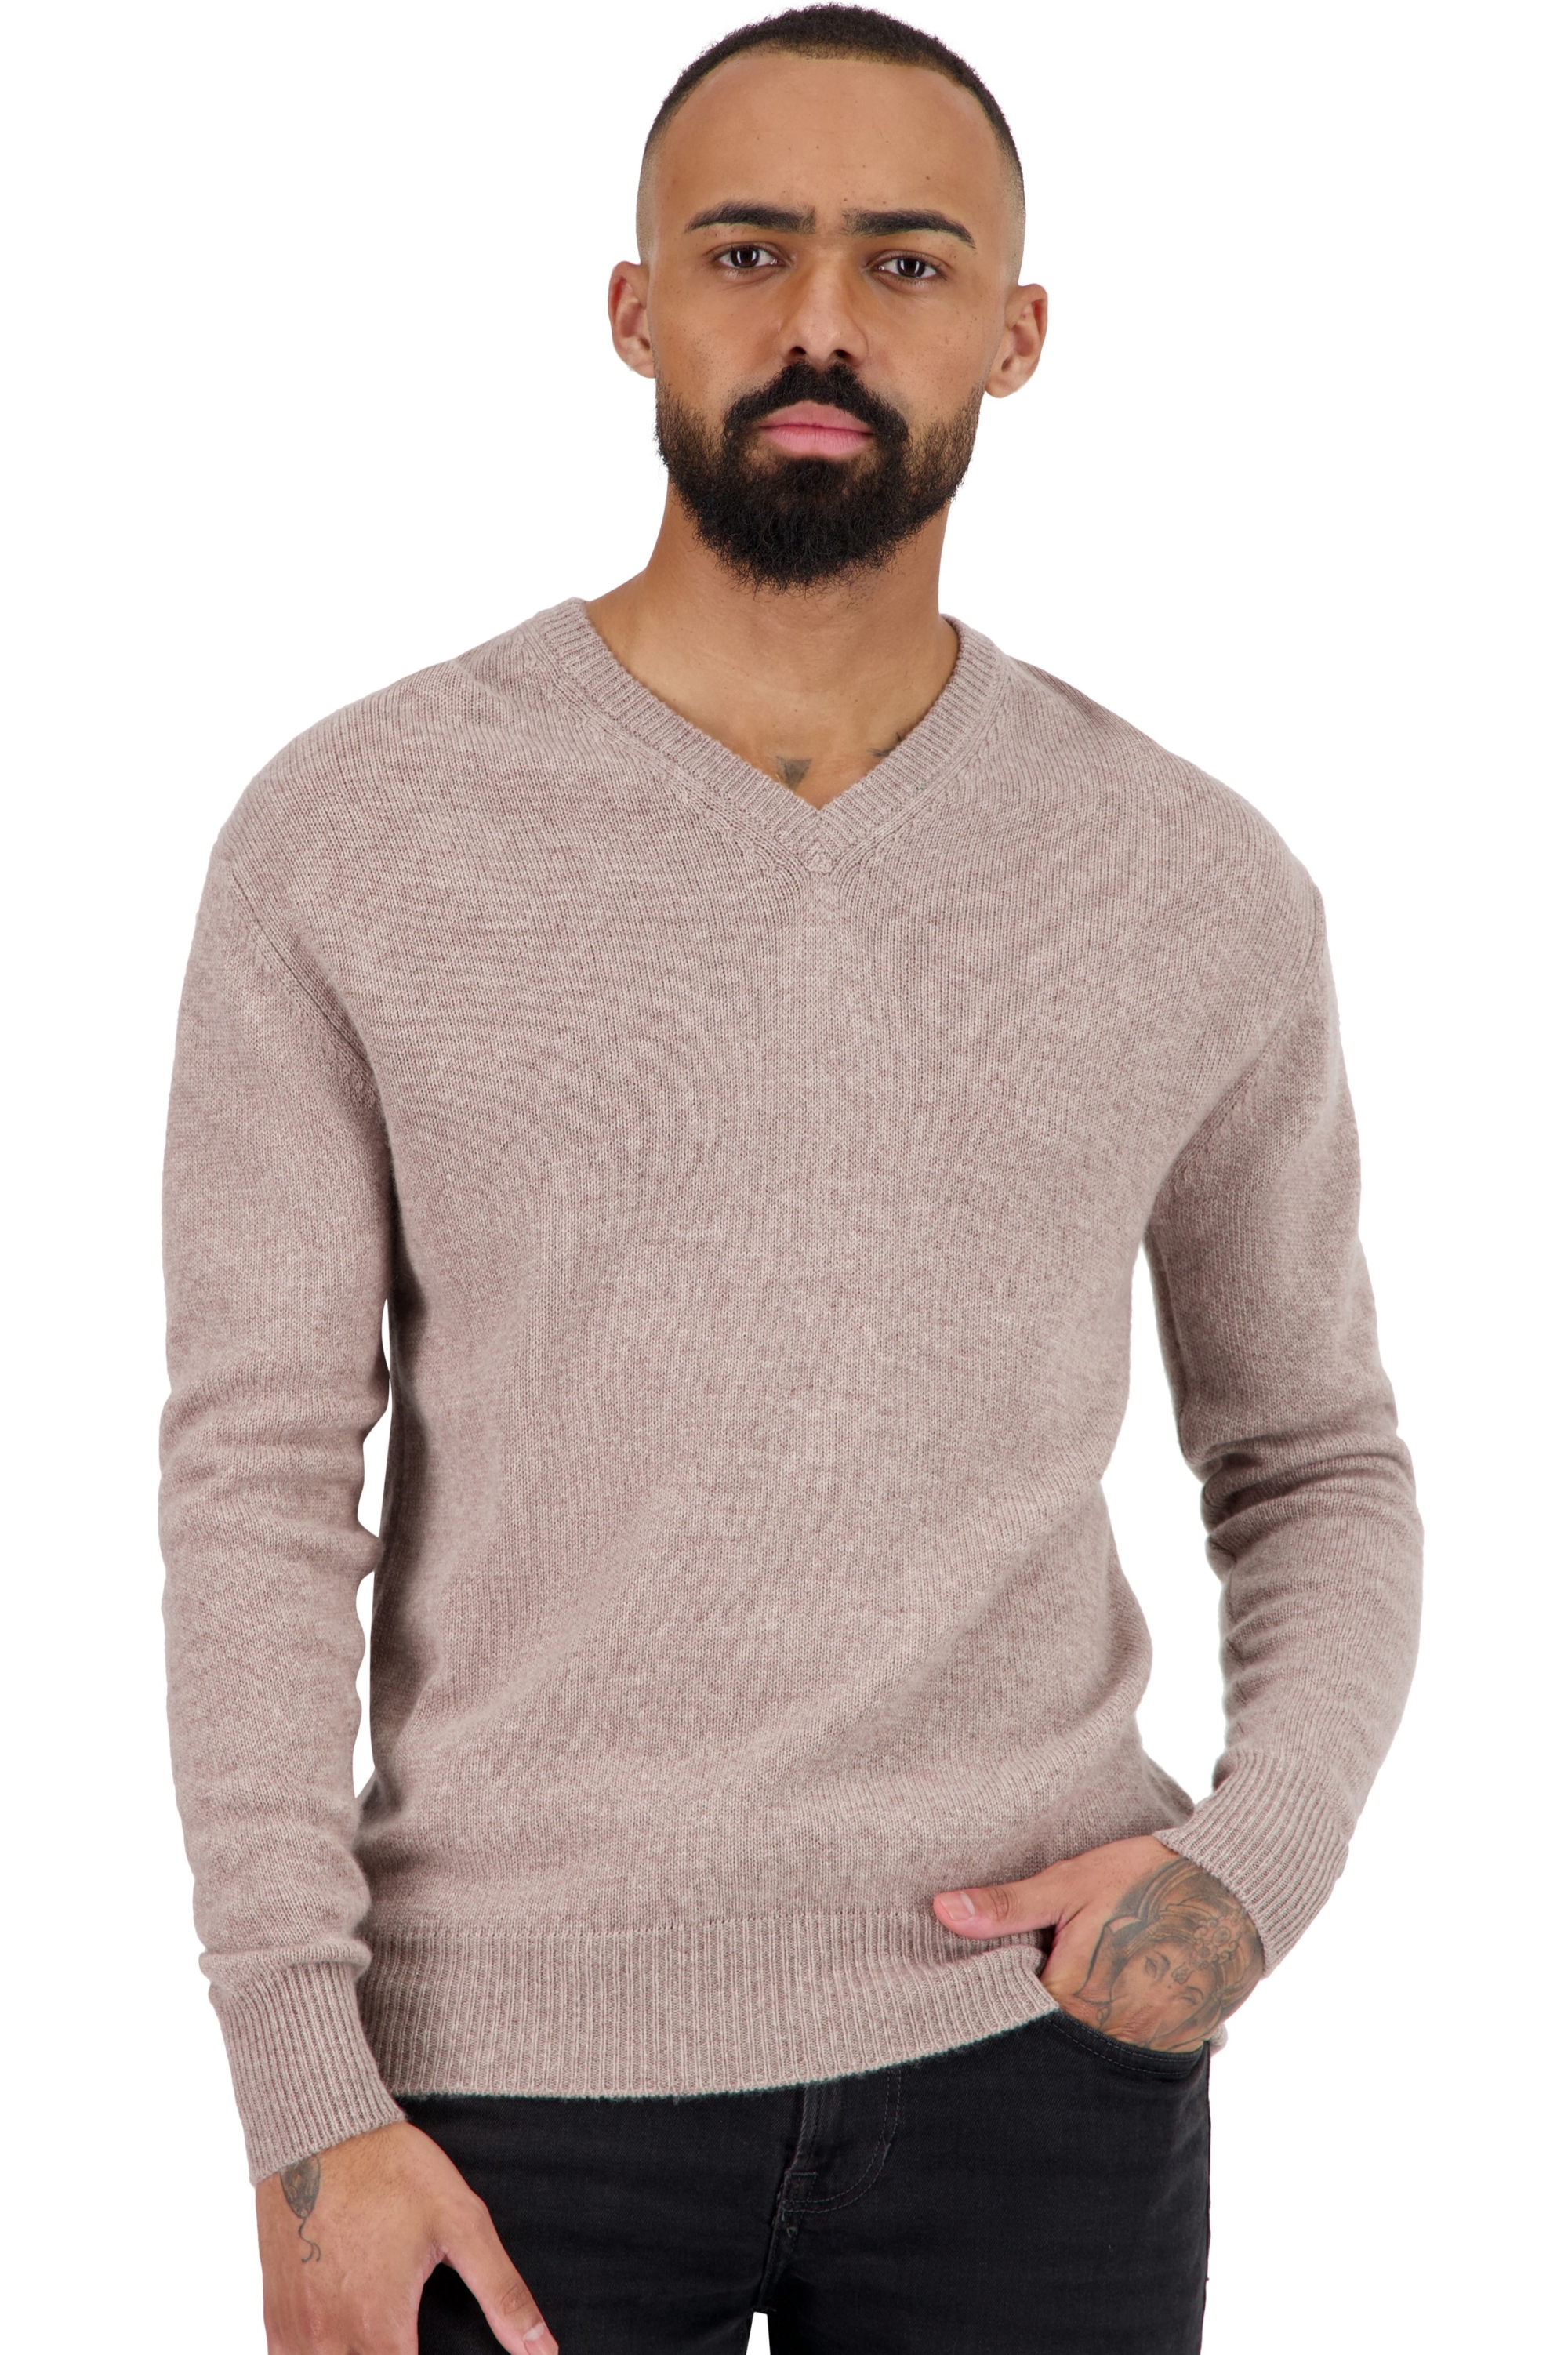 Cashmere men basic sweaters at low prices tour first toast xl